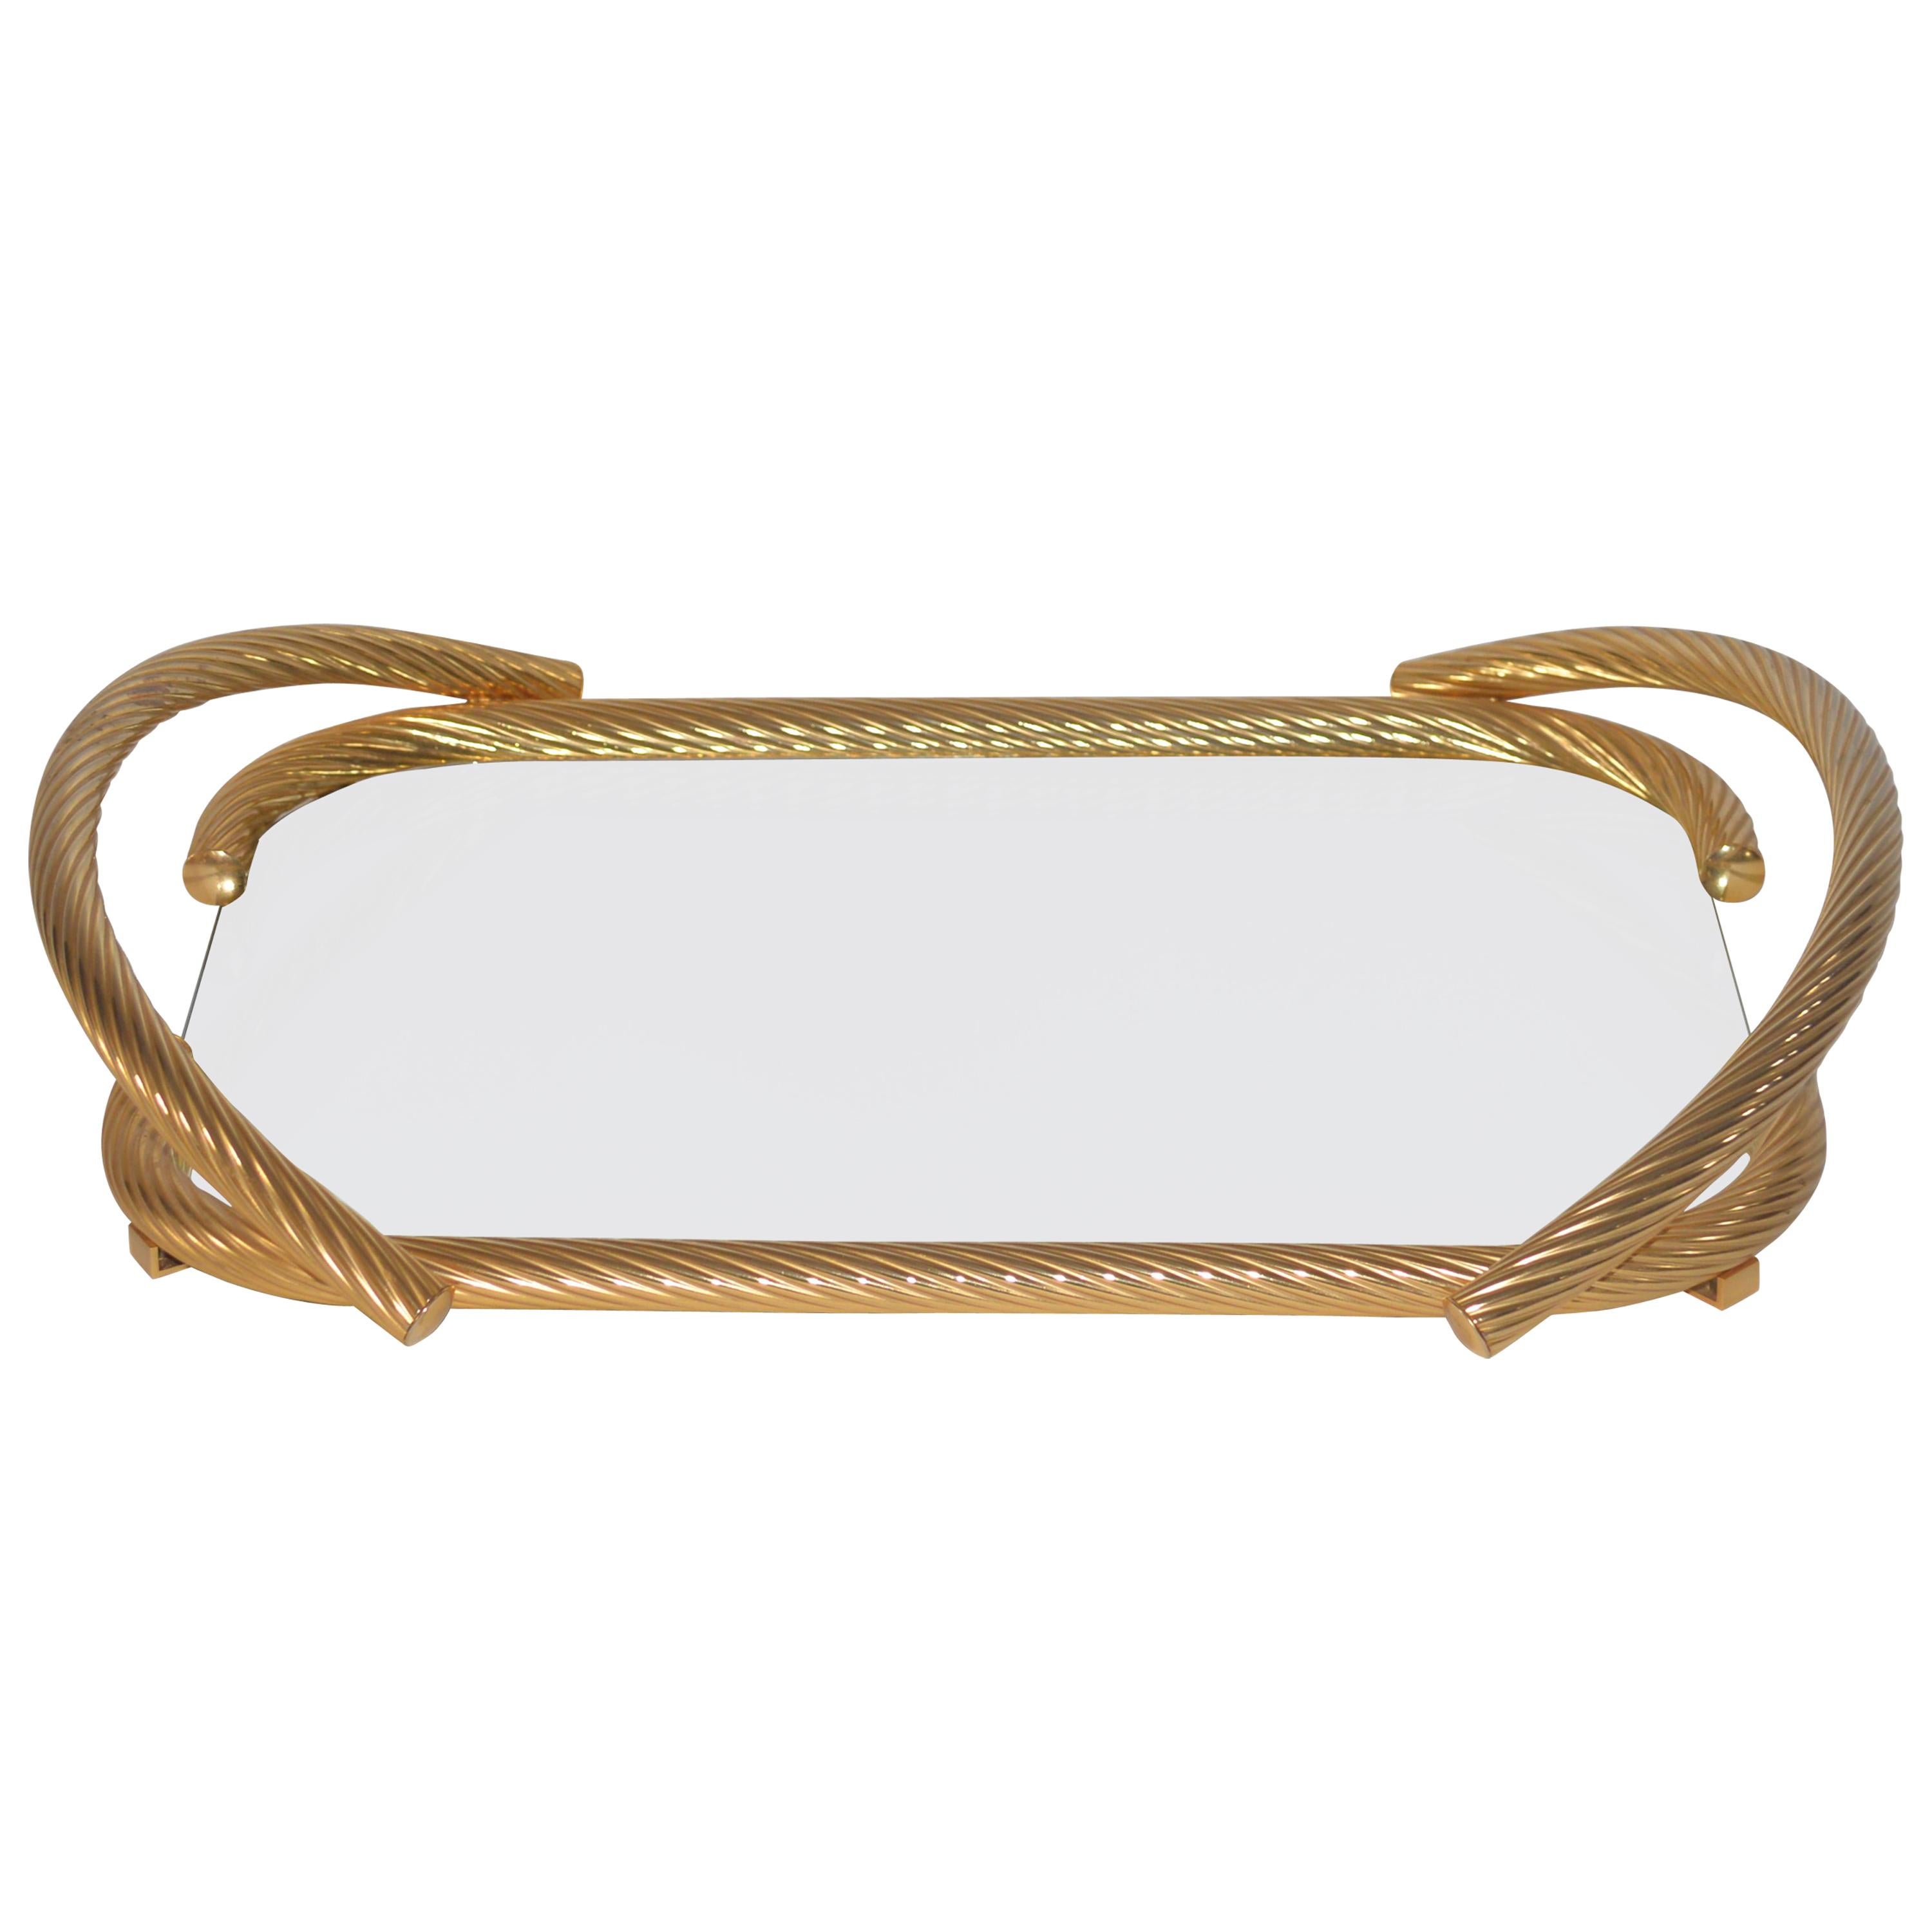 Vintage Italian 24-Carat Gold-Plated Serving Tray